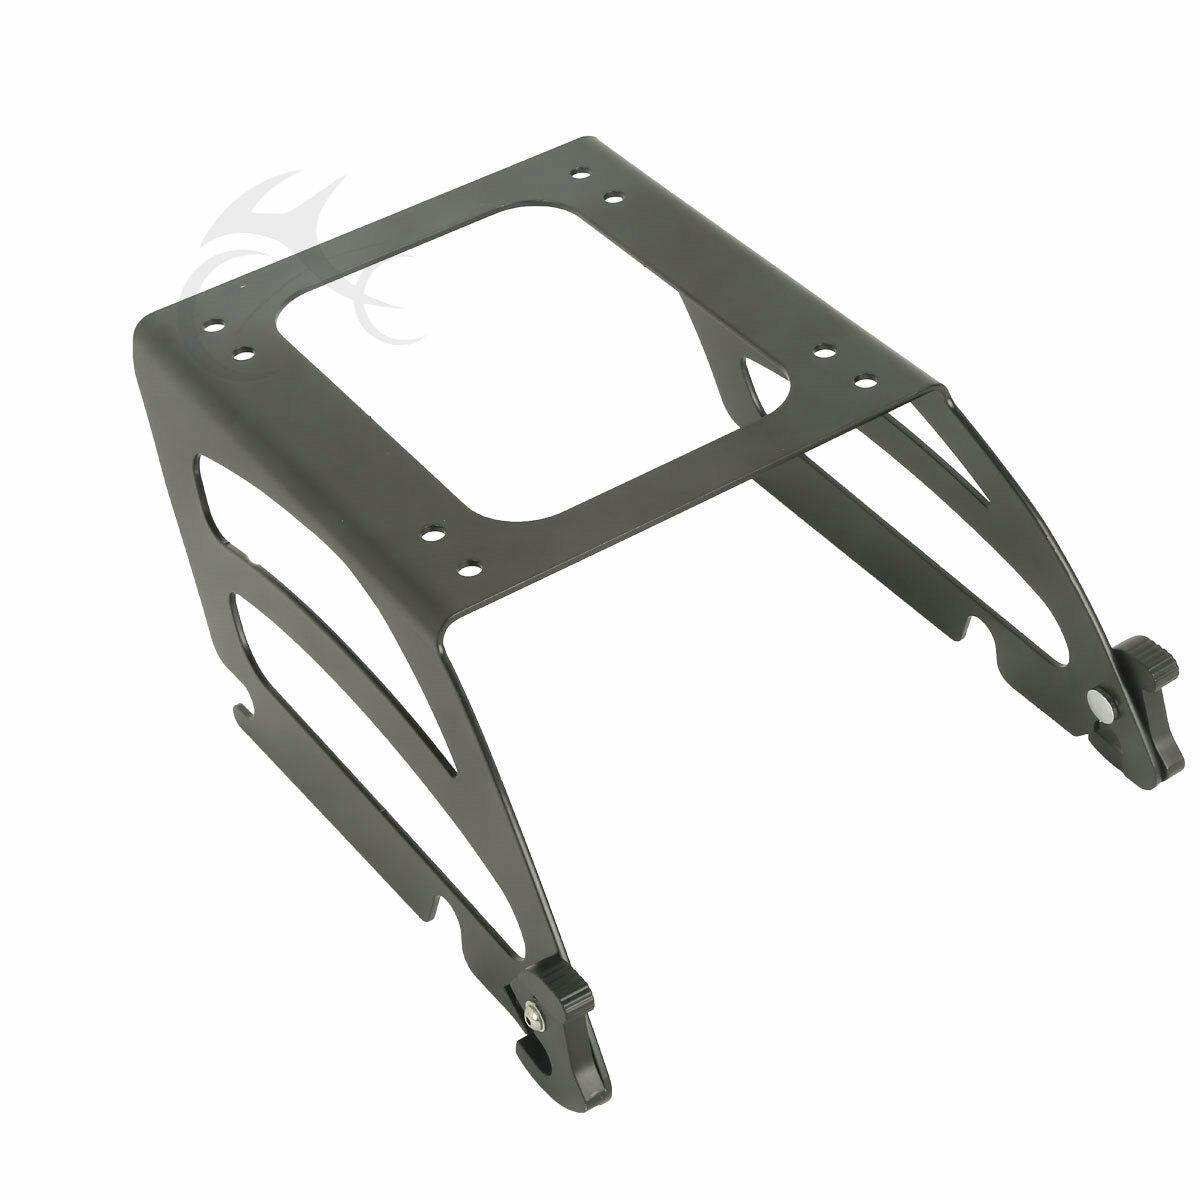 Solo Trunk Luggage Mount Rack Fit For Harley Heritage Softail Fat Boy Deluxe - Moto Life Products